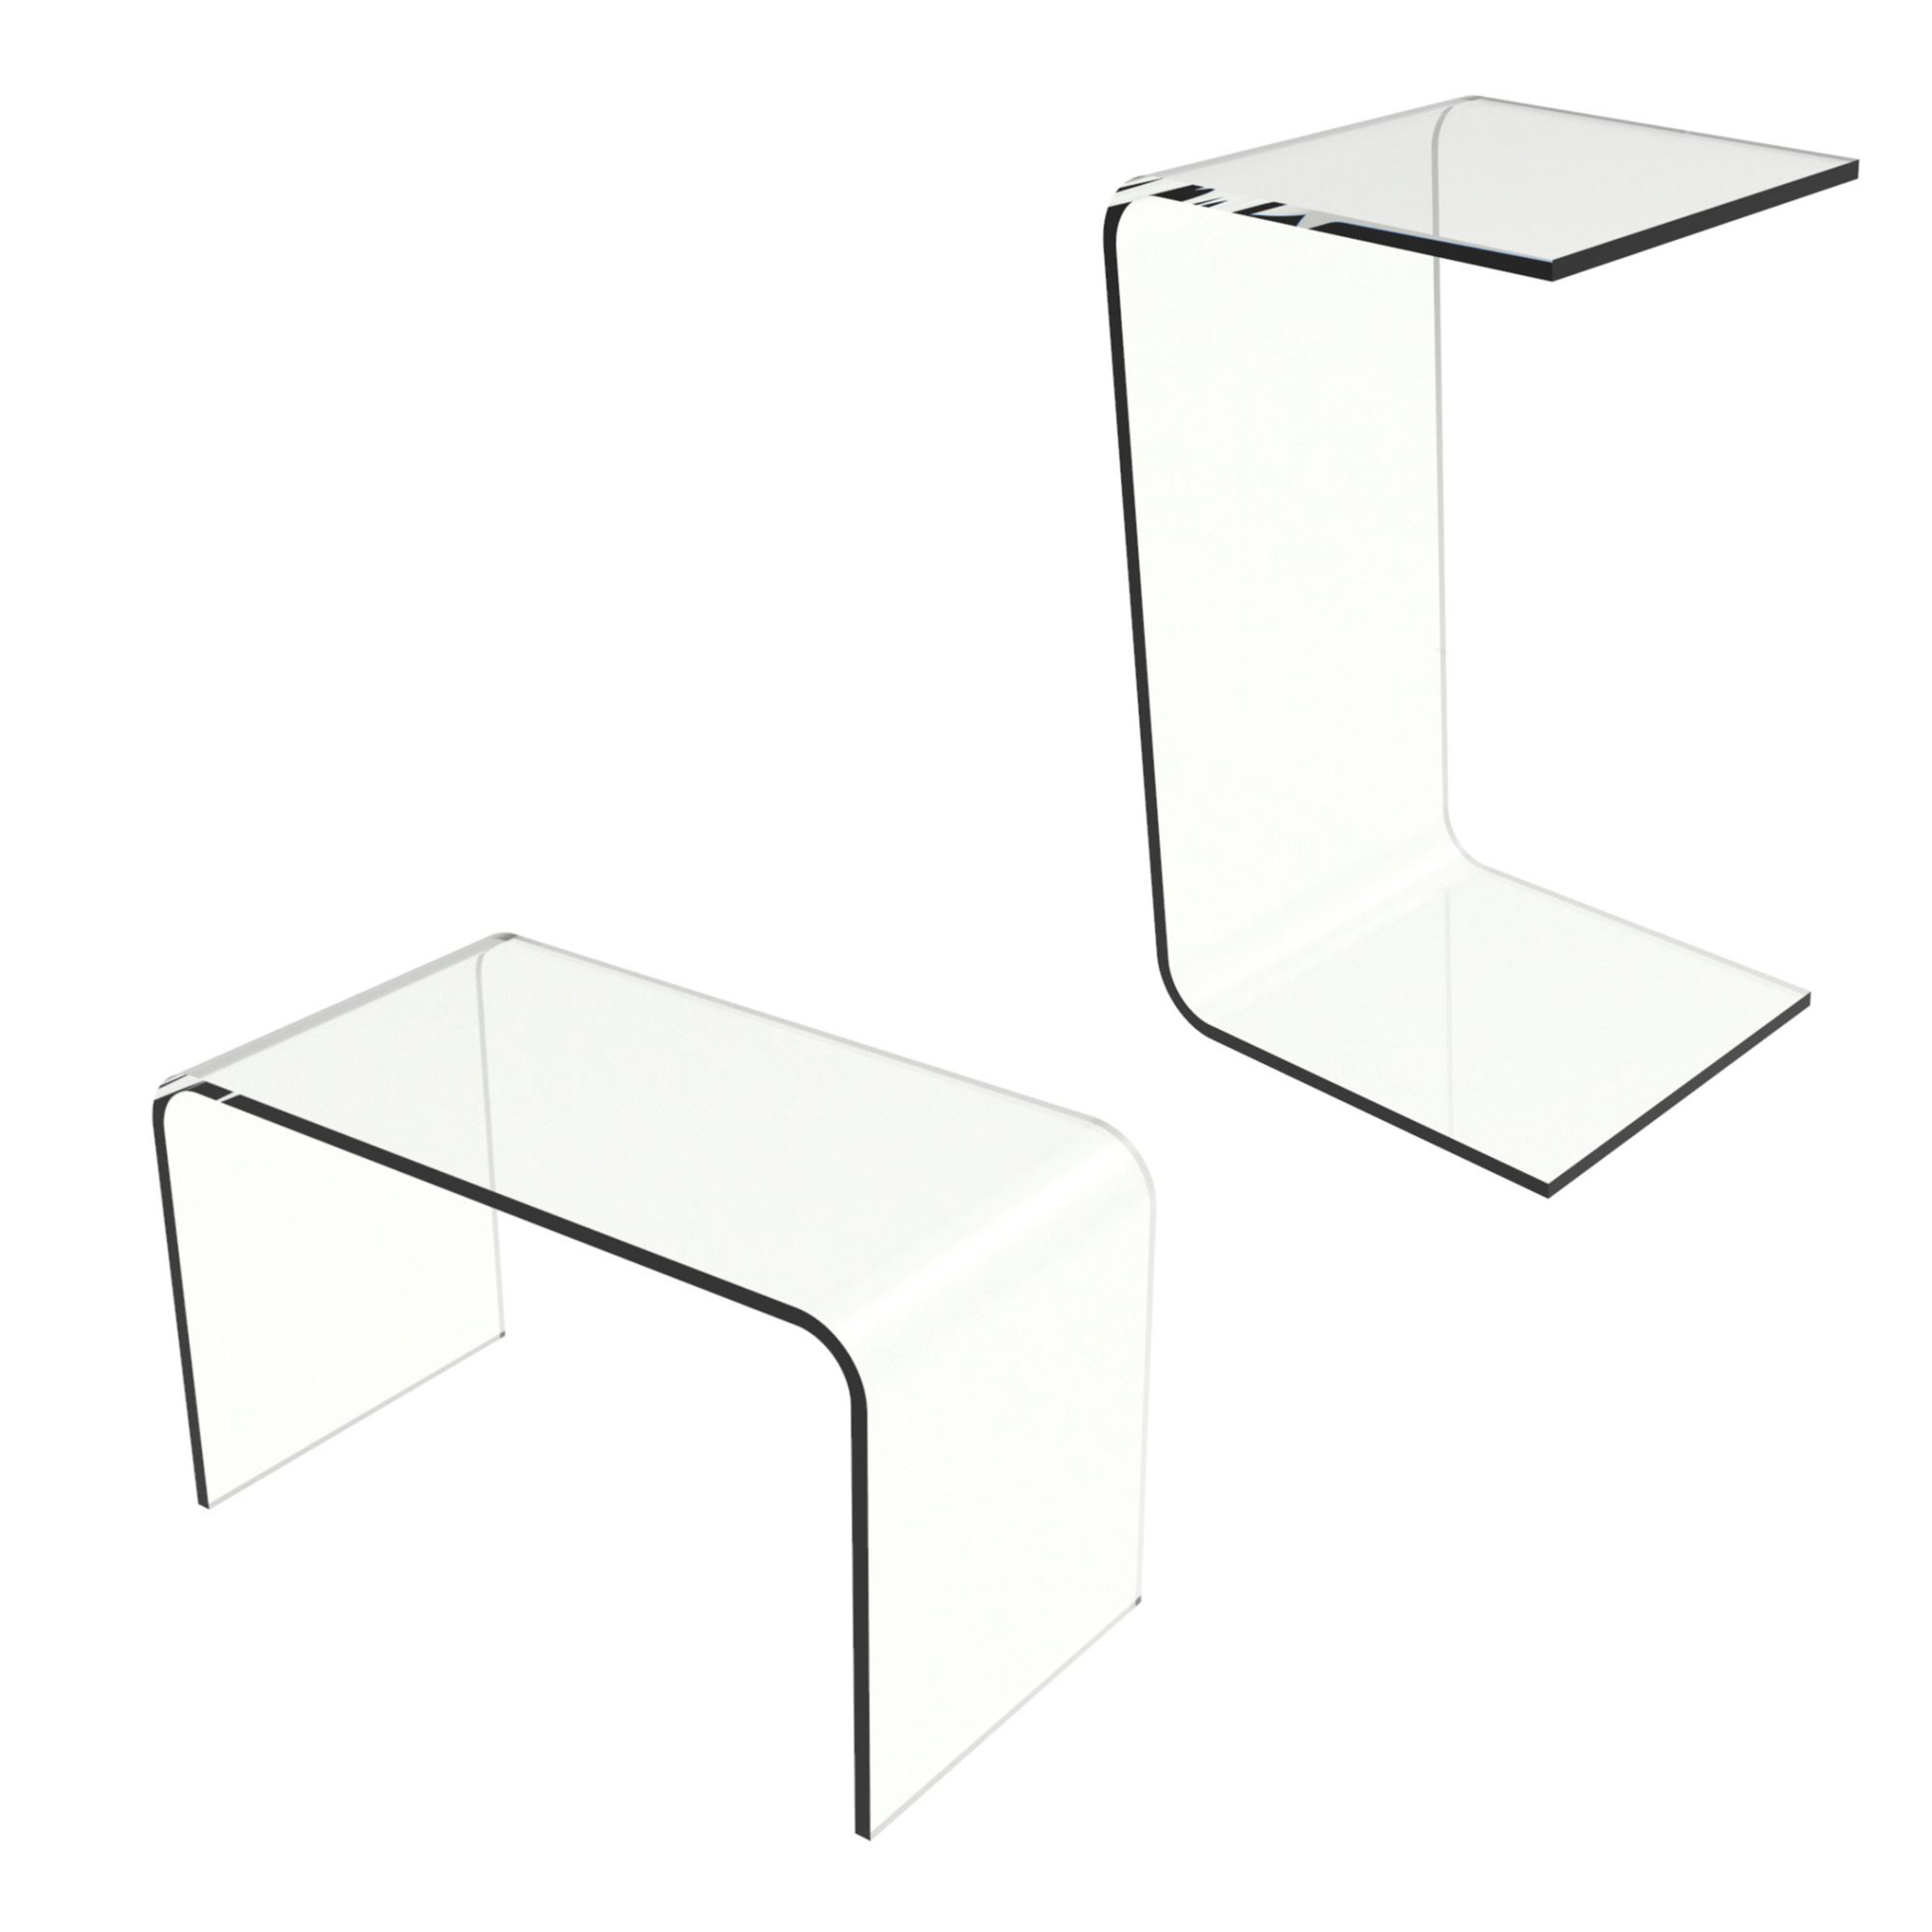 Lavish Home Clear Acrylic Side Table for Lap Desk, Coffee, or End Table - image 1 of 8